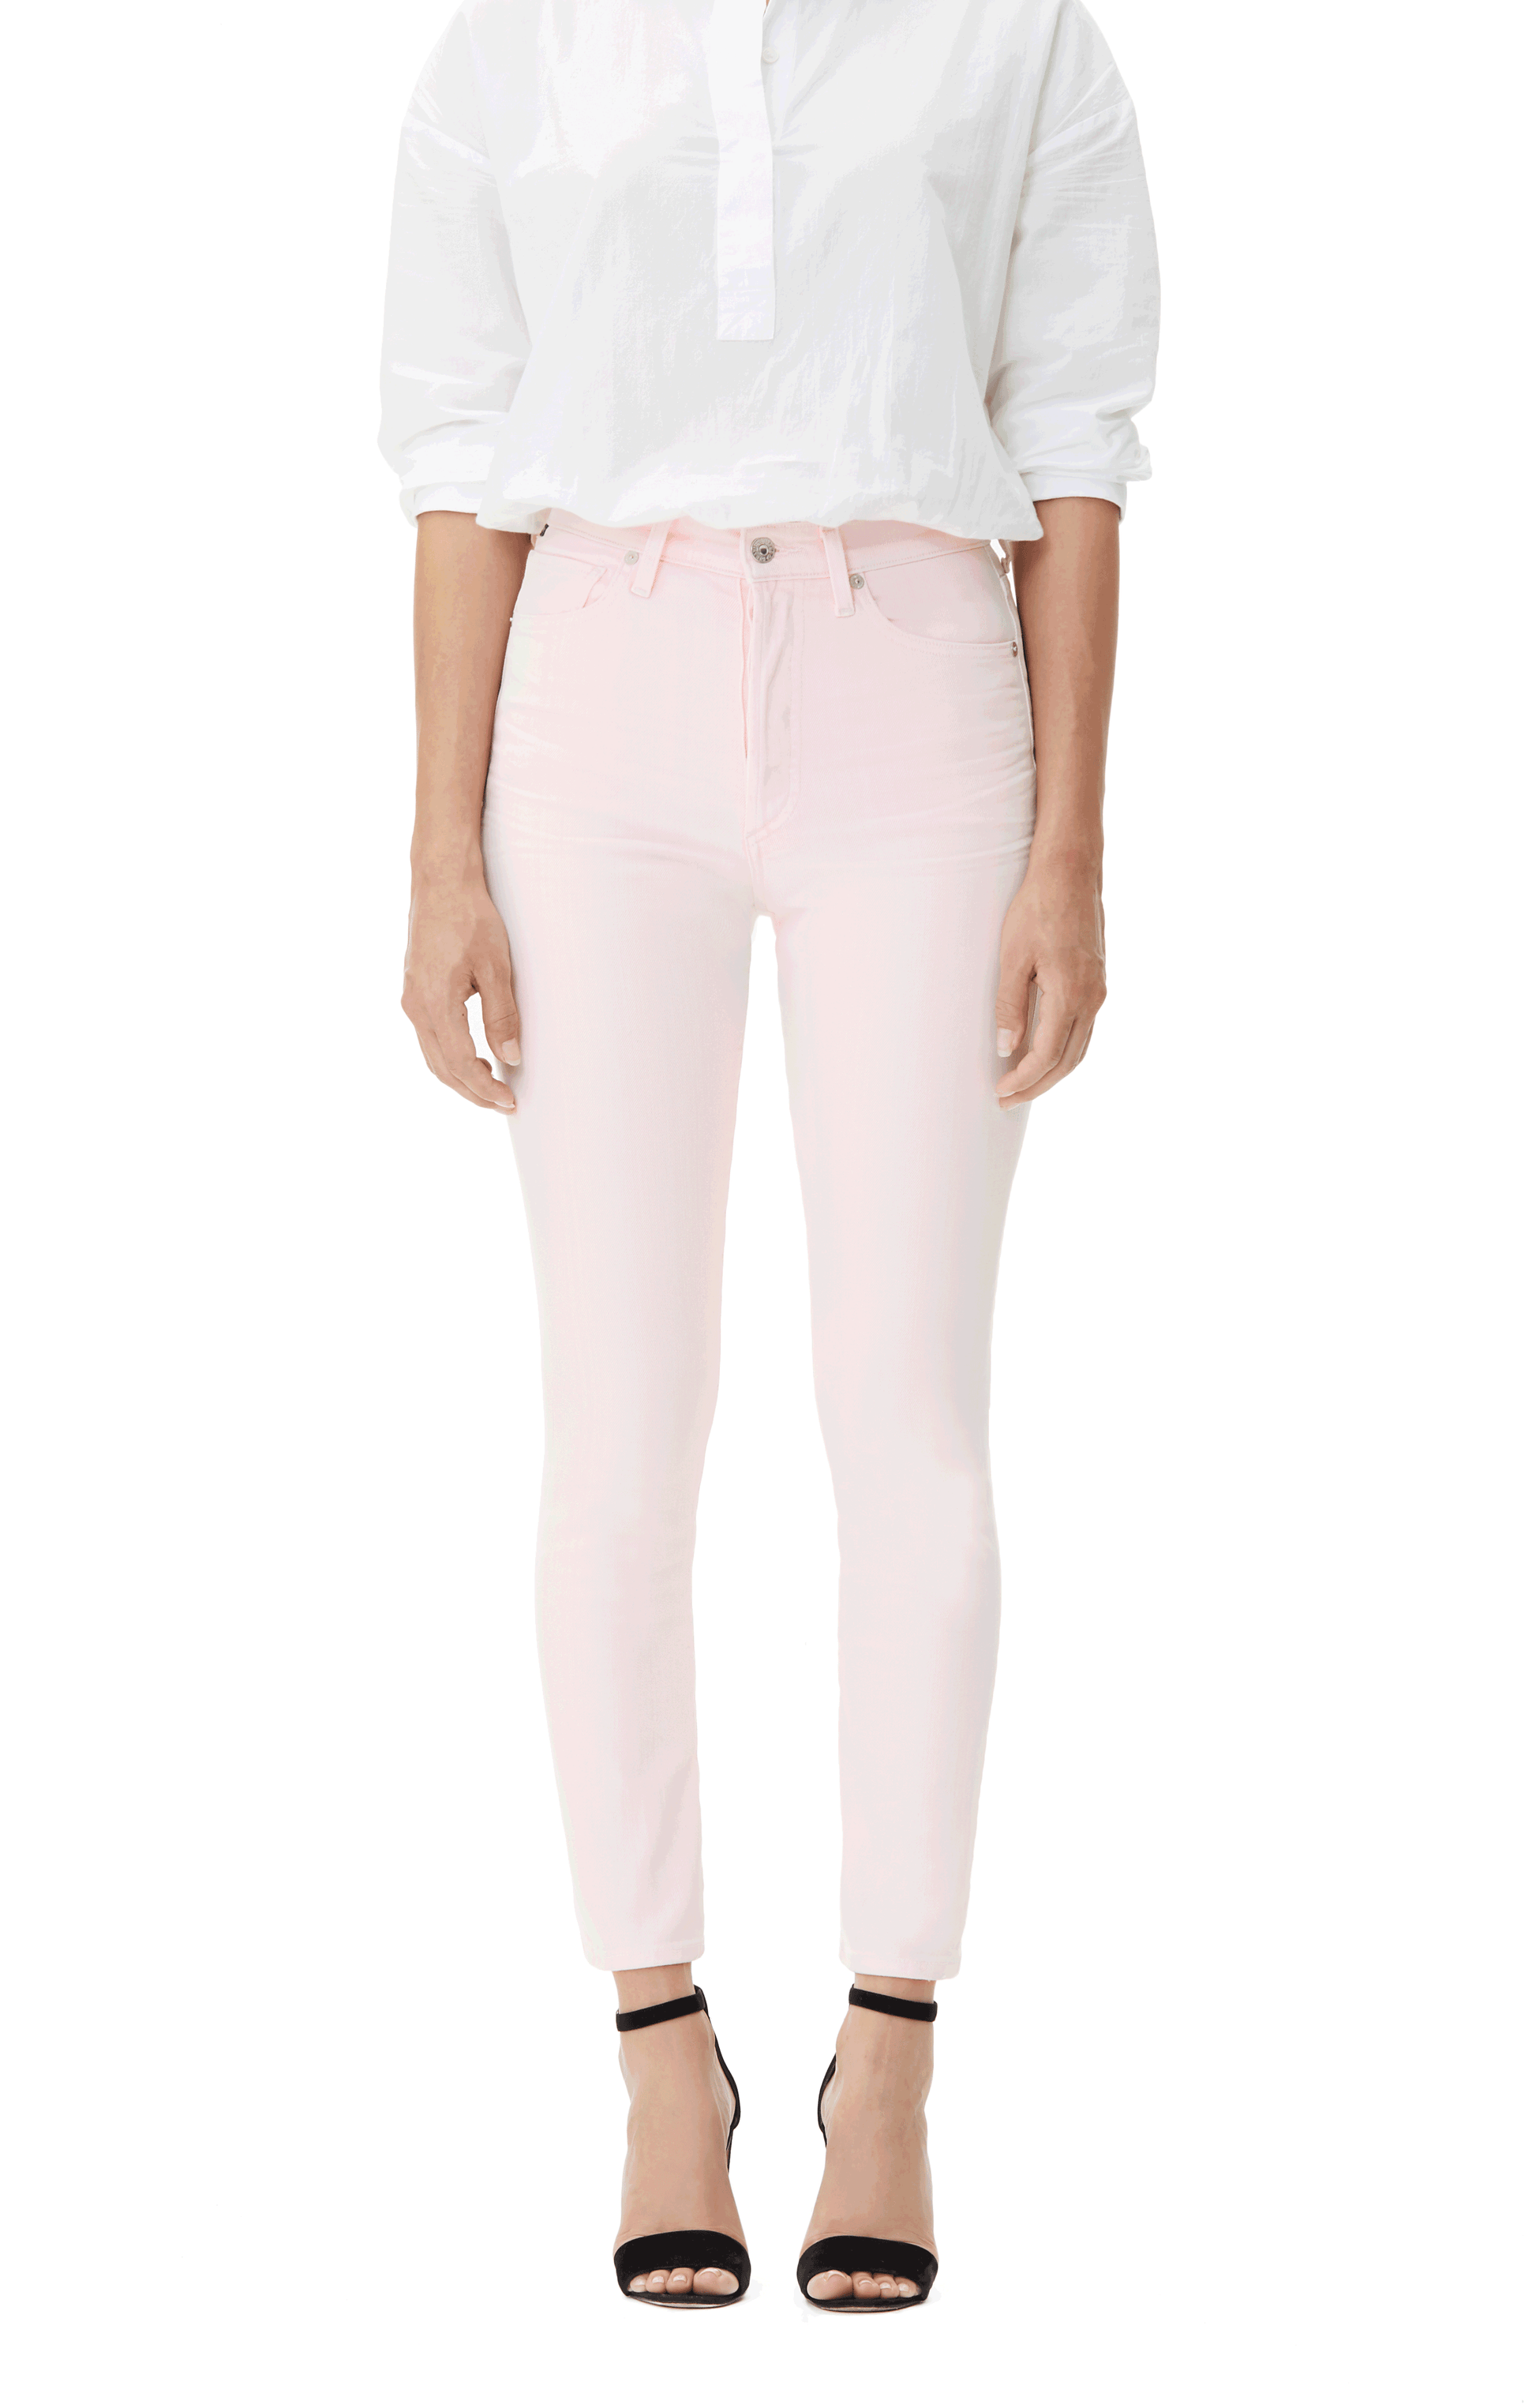 CITIZENS of HUMANITY-Olivia Cropped Slim High Rise Jean-